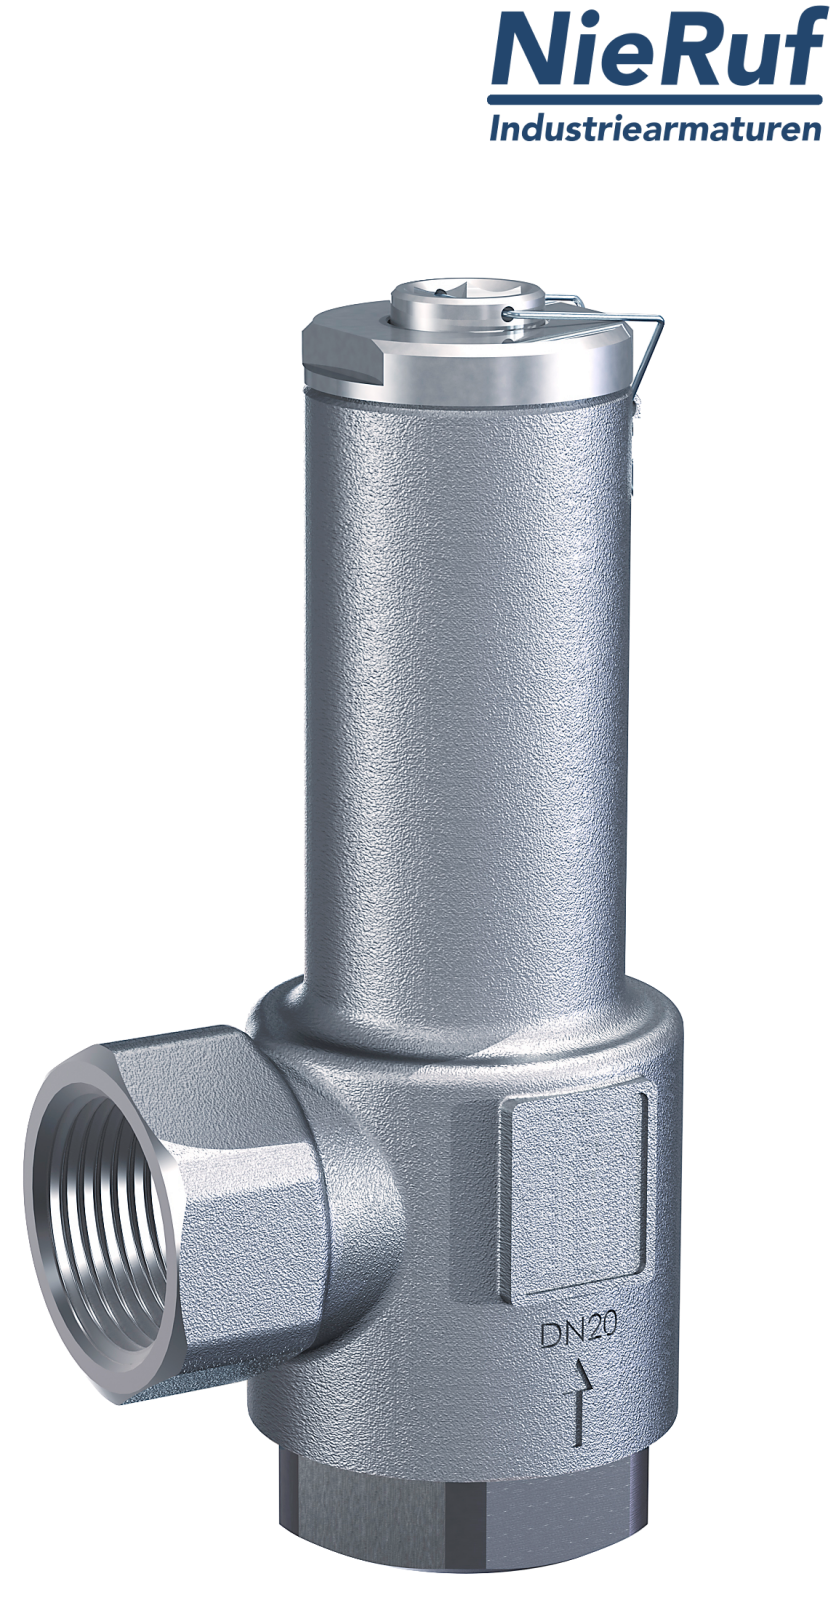 angle-type overflow valve 2" inch fm UV04 stainless steel AISI 316L 0,5 - 2,5 bar